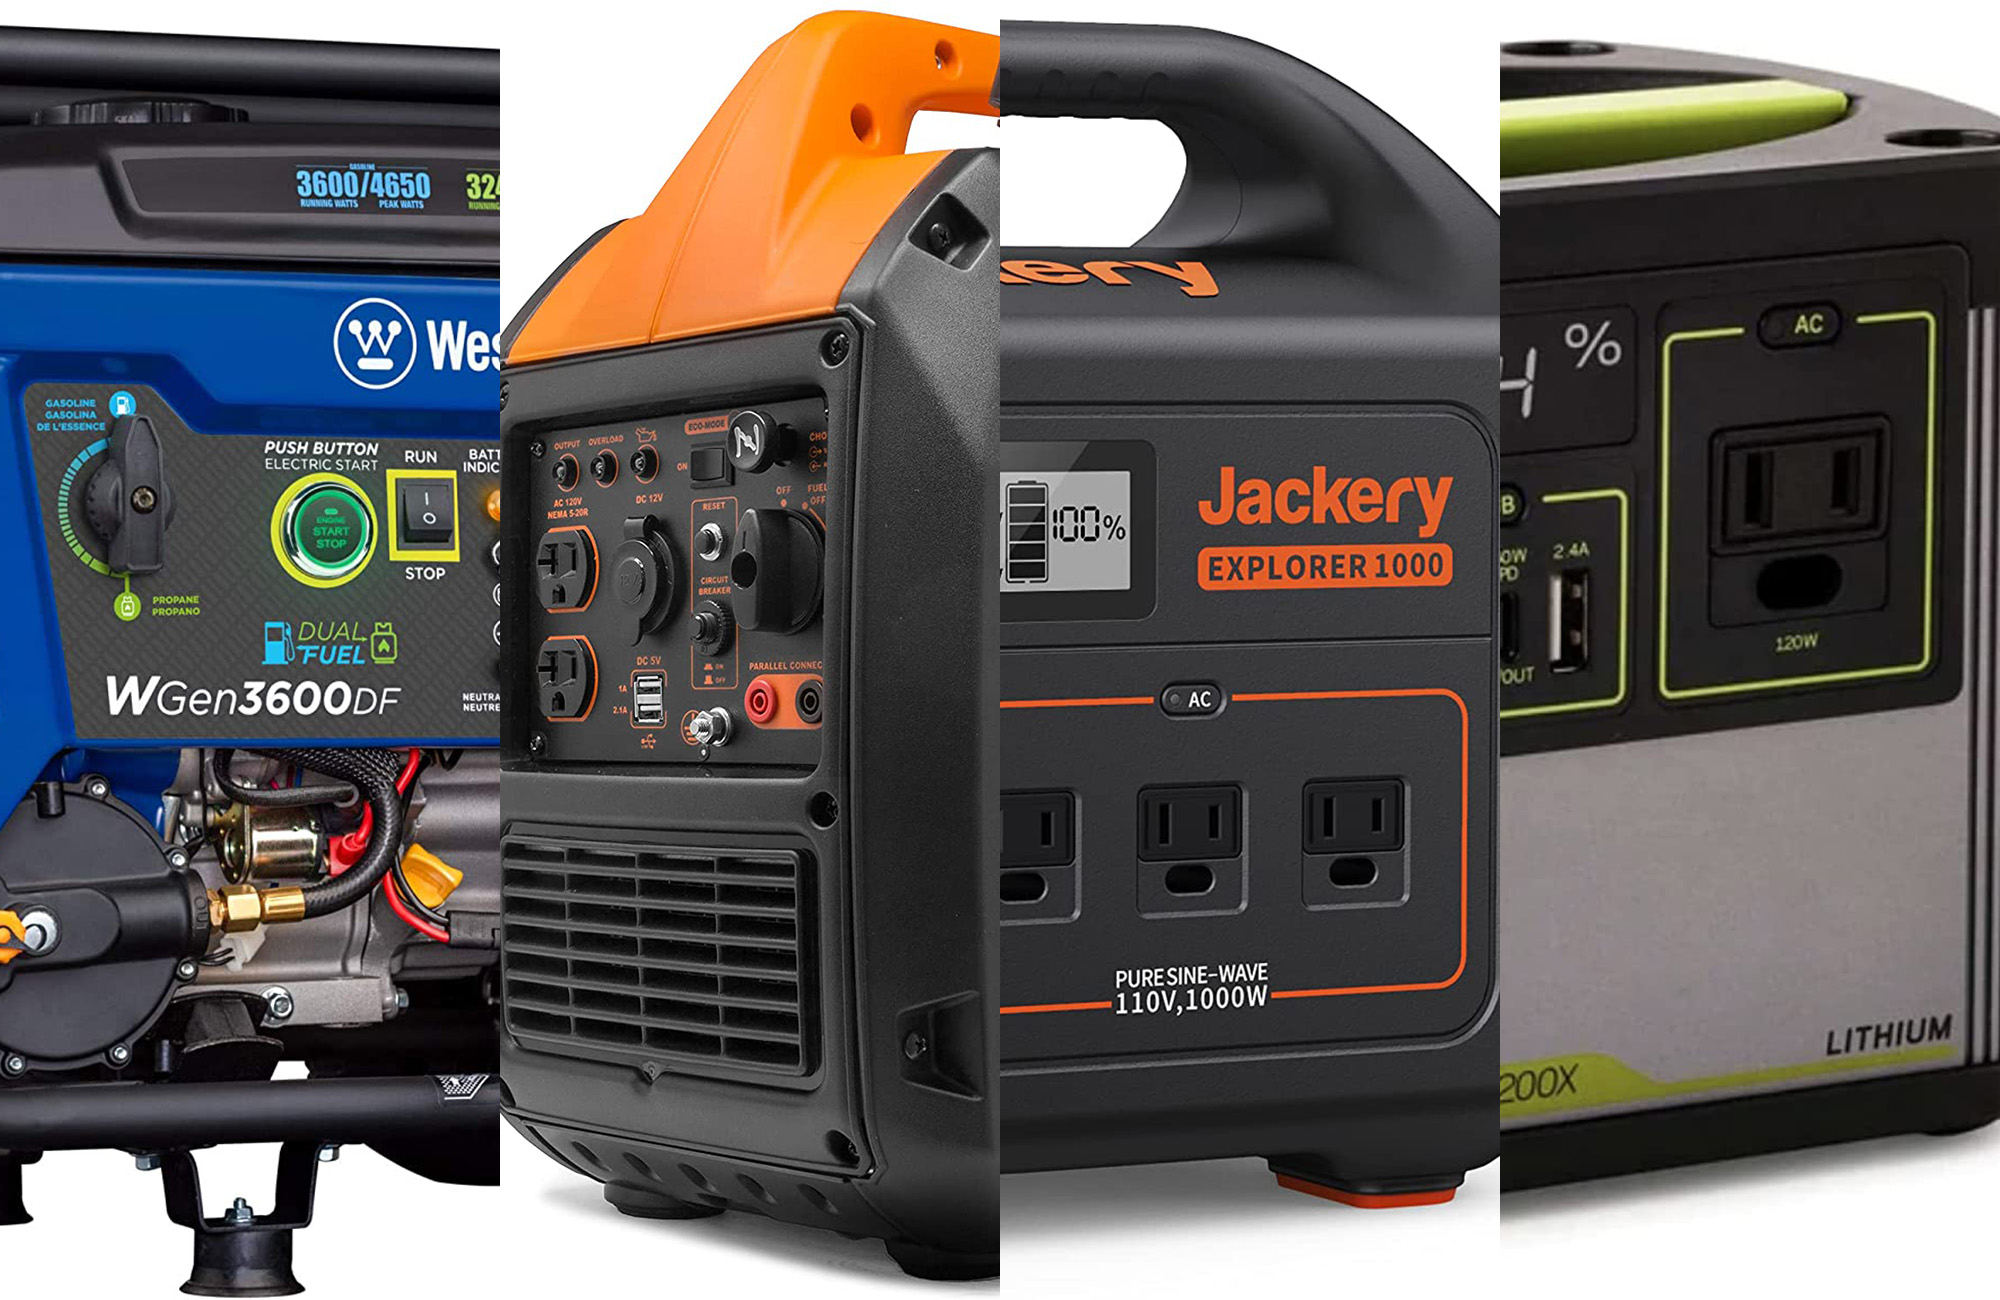 There's Now an Ultra-Rugged Job Site Coffee Maker That Runs On Power Tool  Batteries